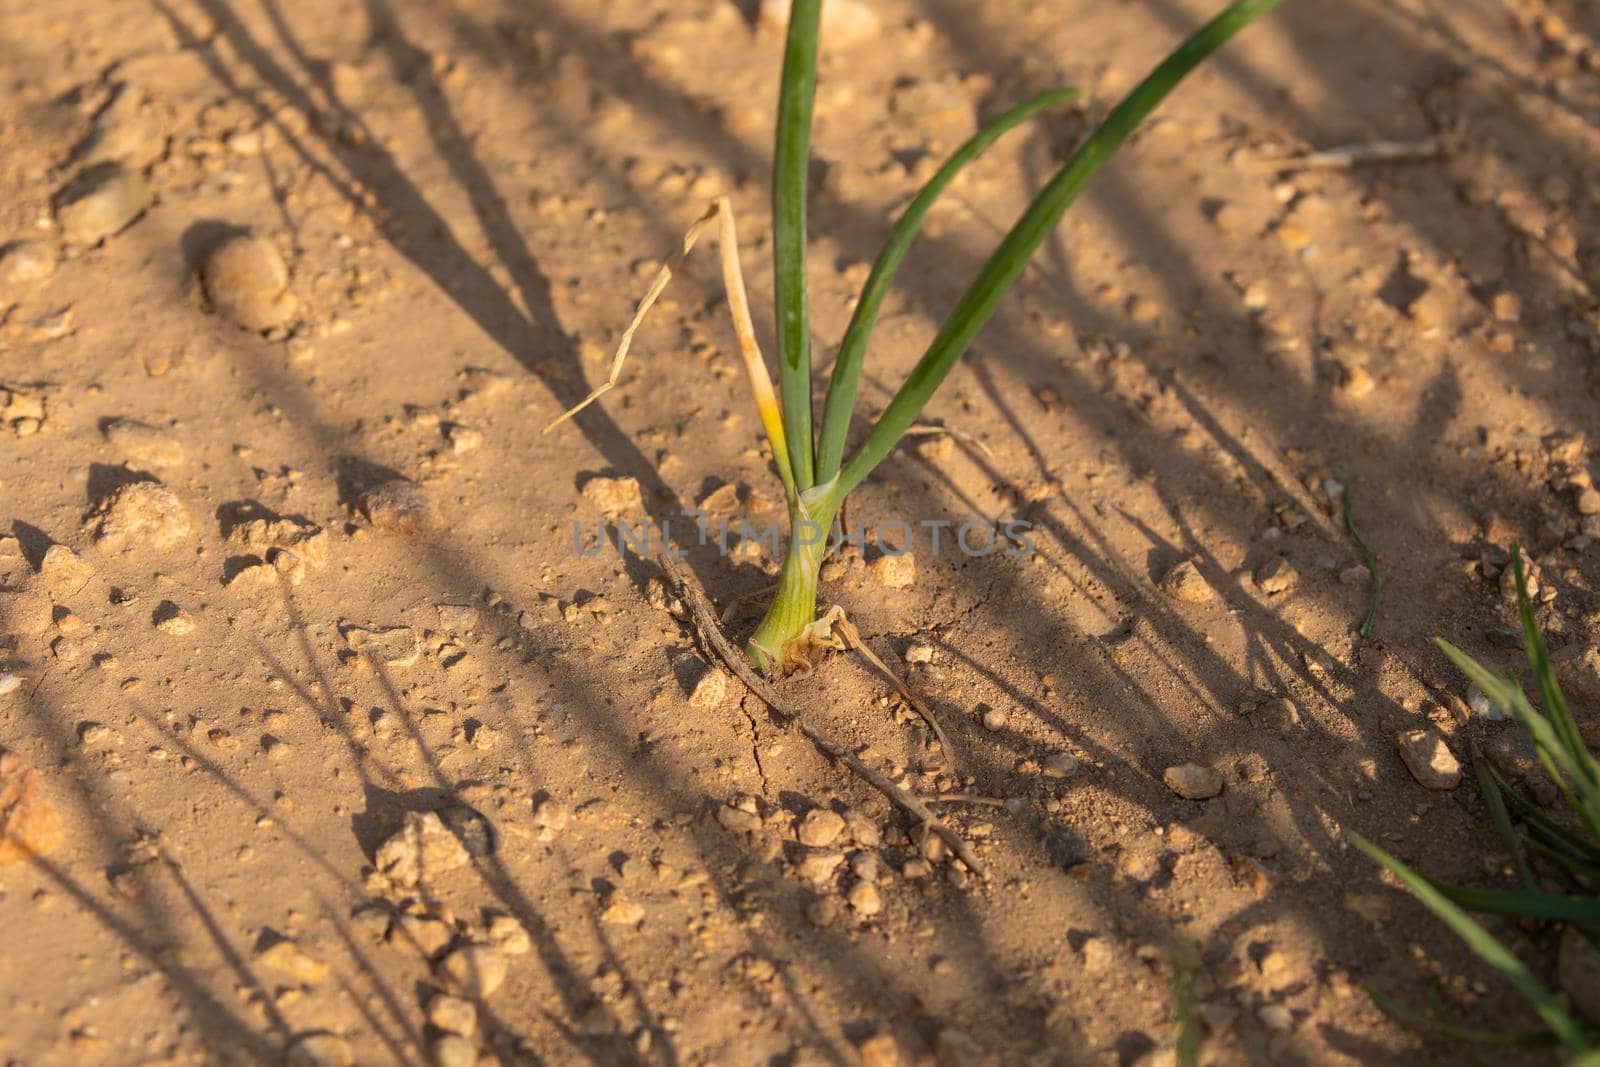 Onions crop in a farm field, agriculture in Spain. by alvarobueno